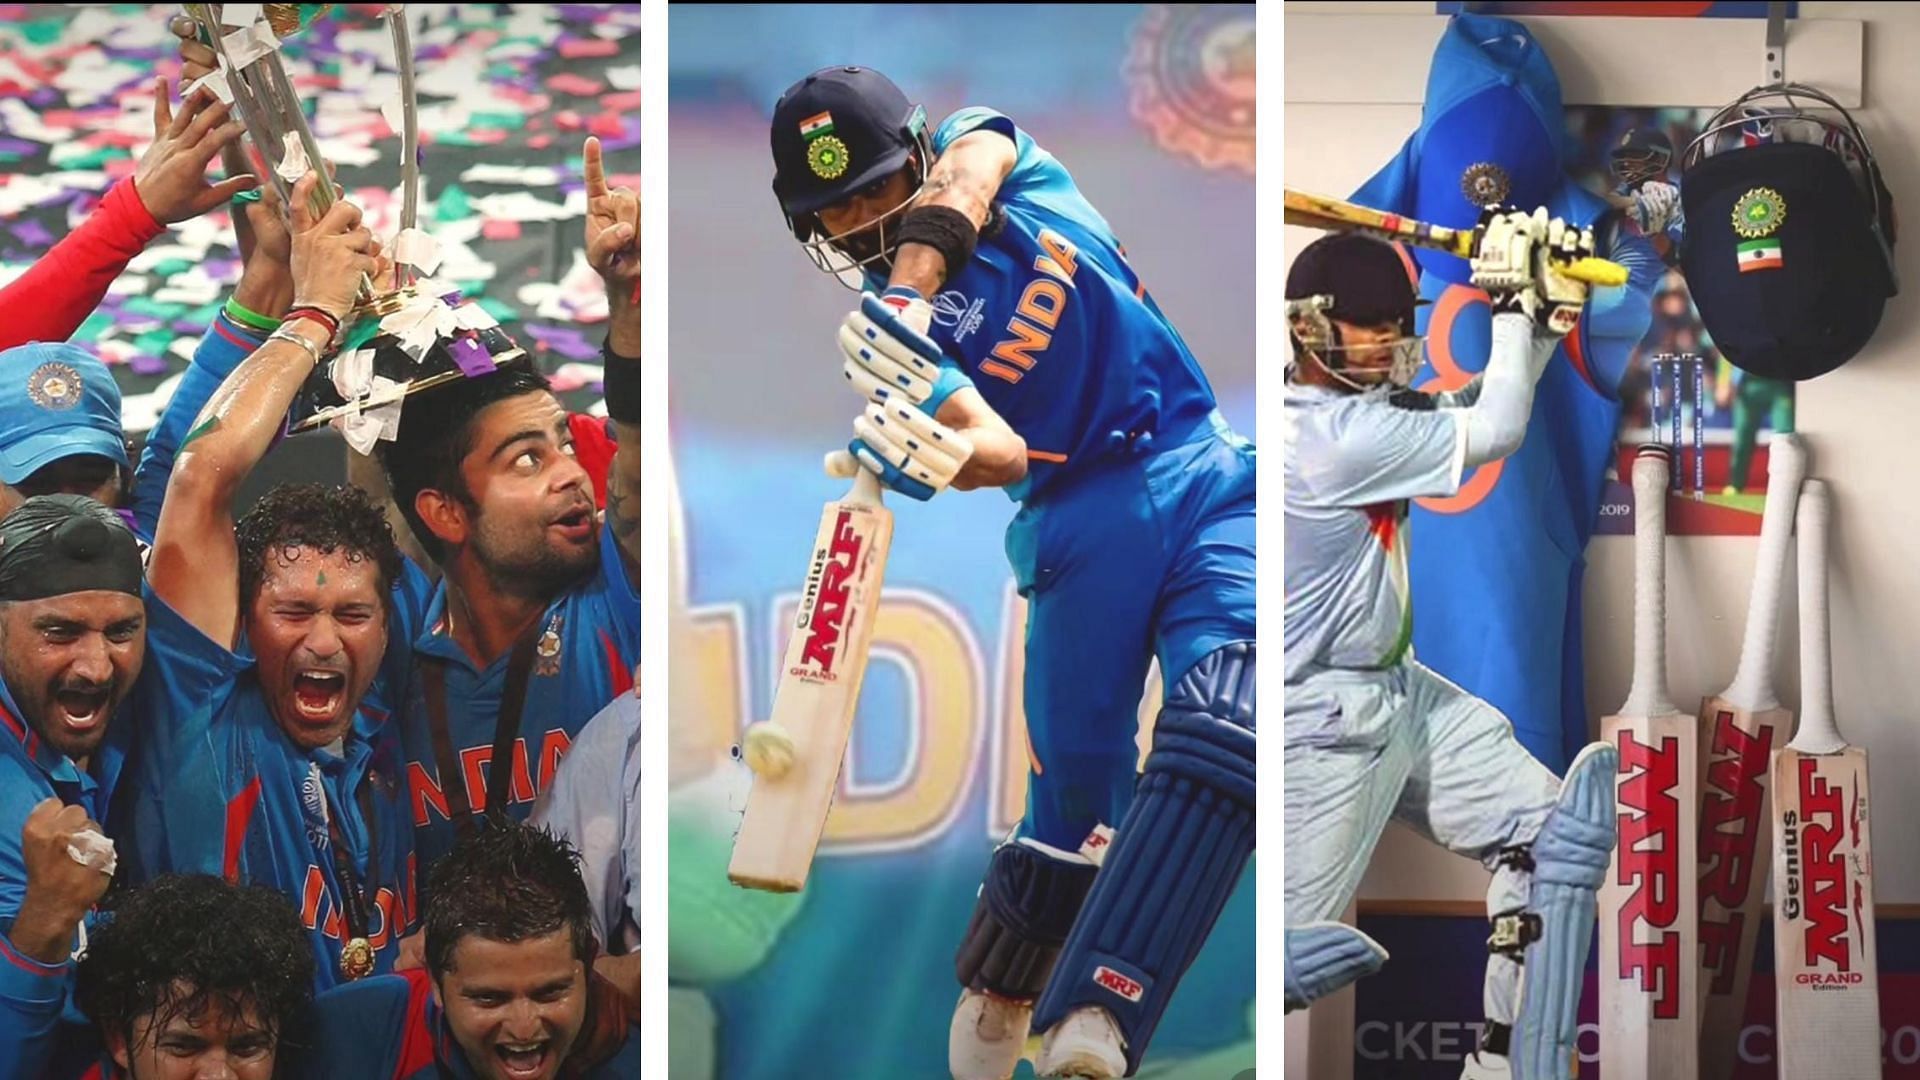 Snippets from reel posted by Virat Kohli on Instagram